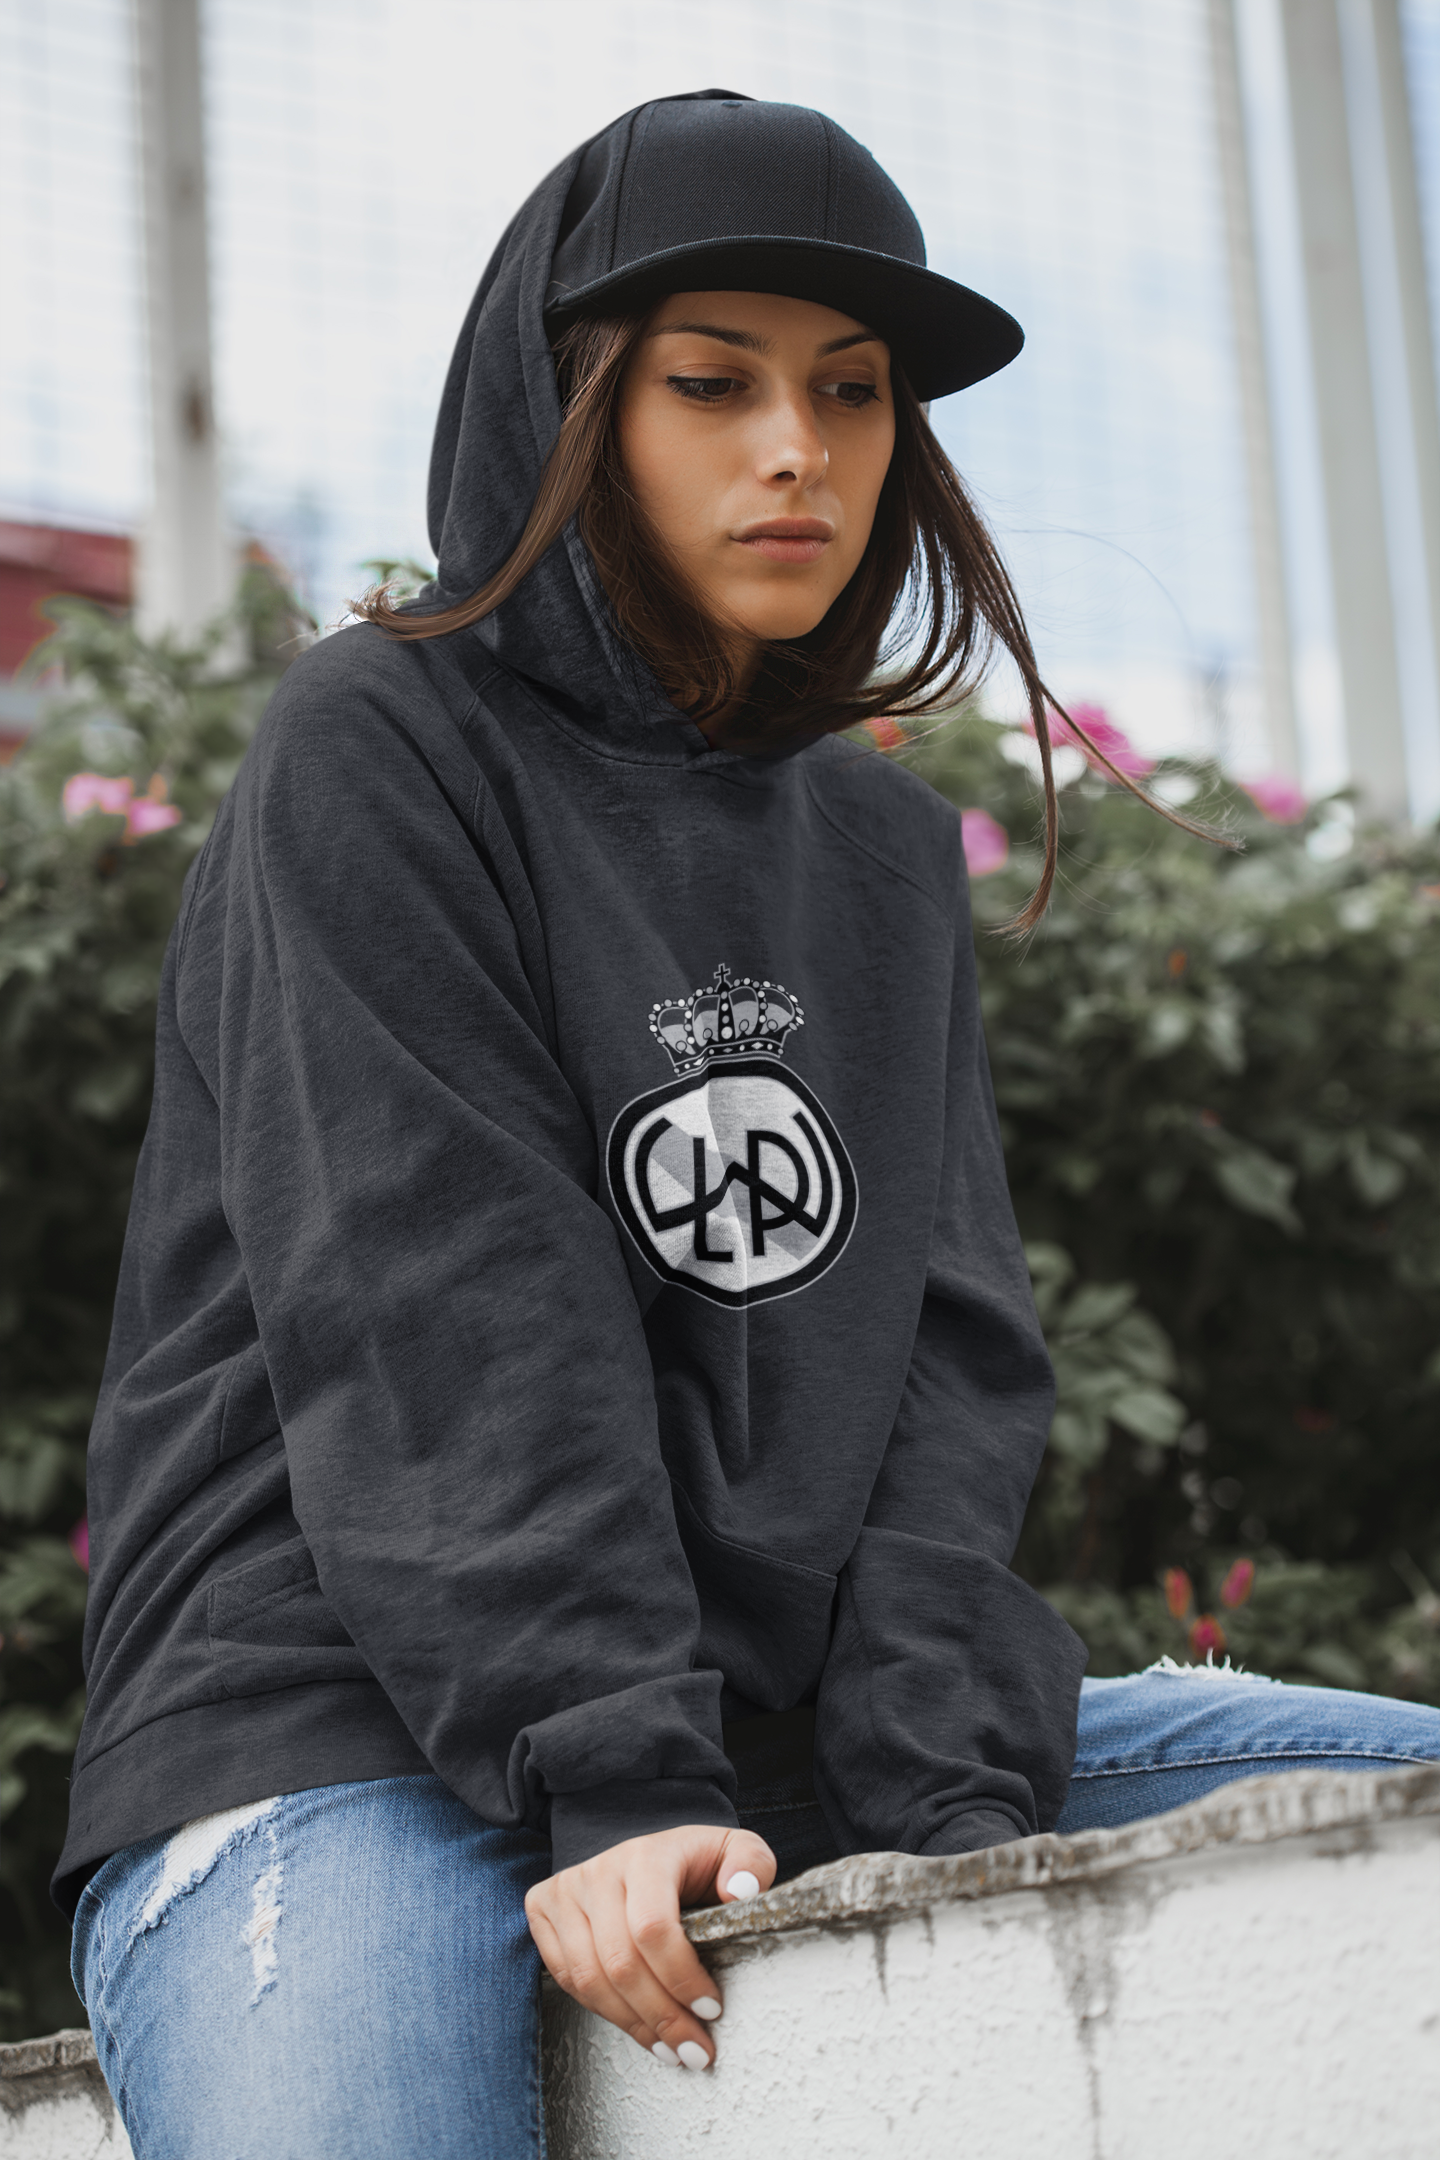 A young women sitting on a wall wearing a dark gray hoodies with the Lake Washington Premier FC club crest on the front in black and white.